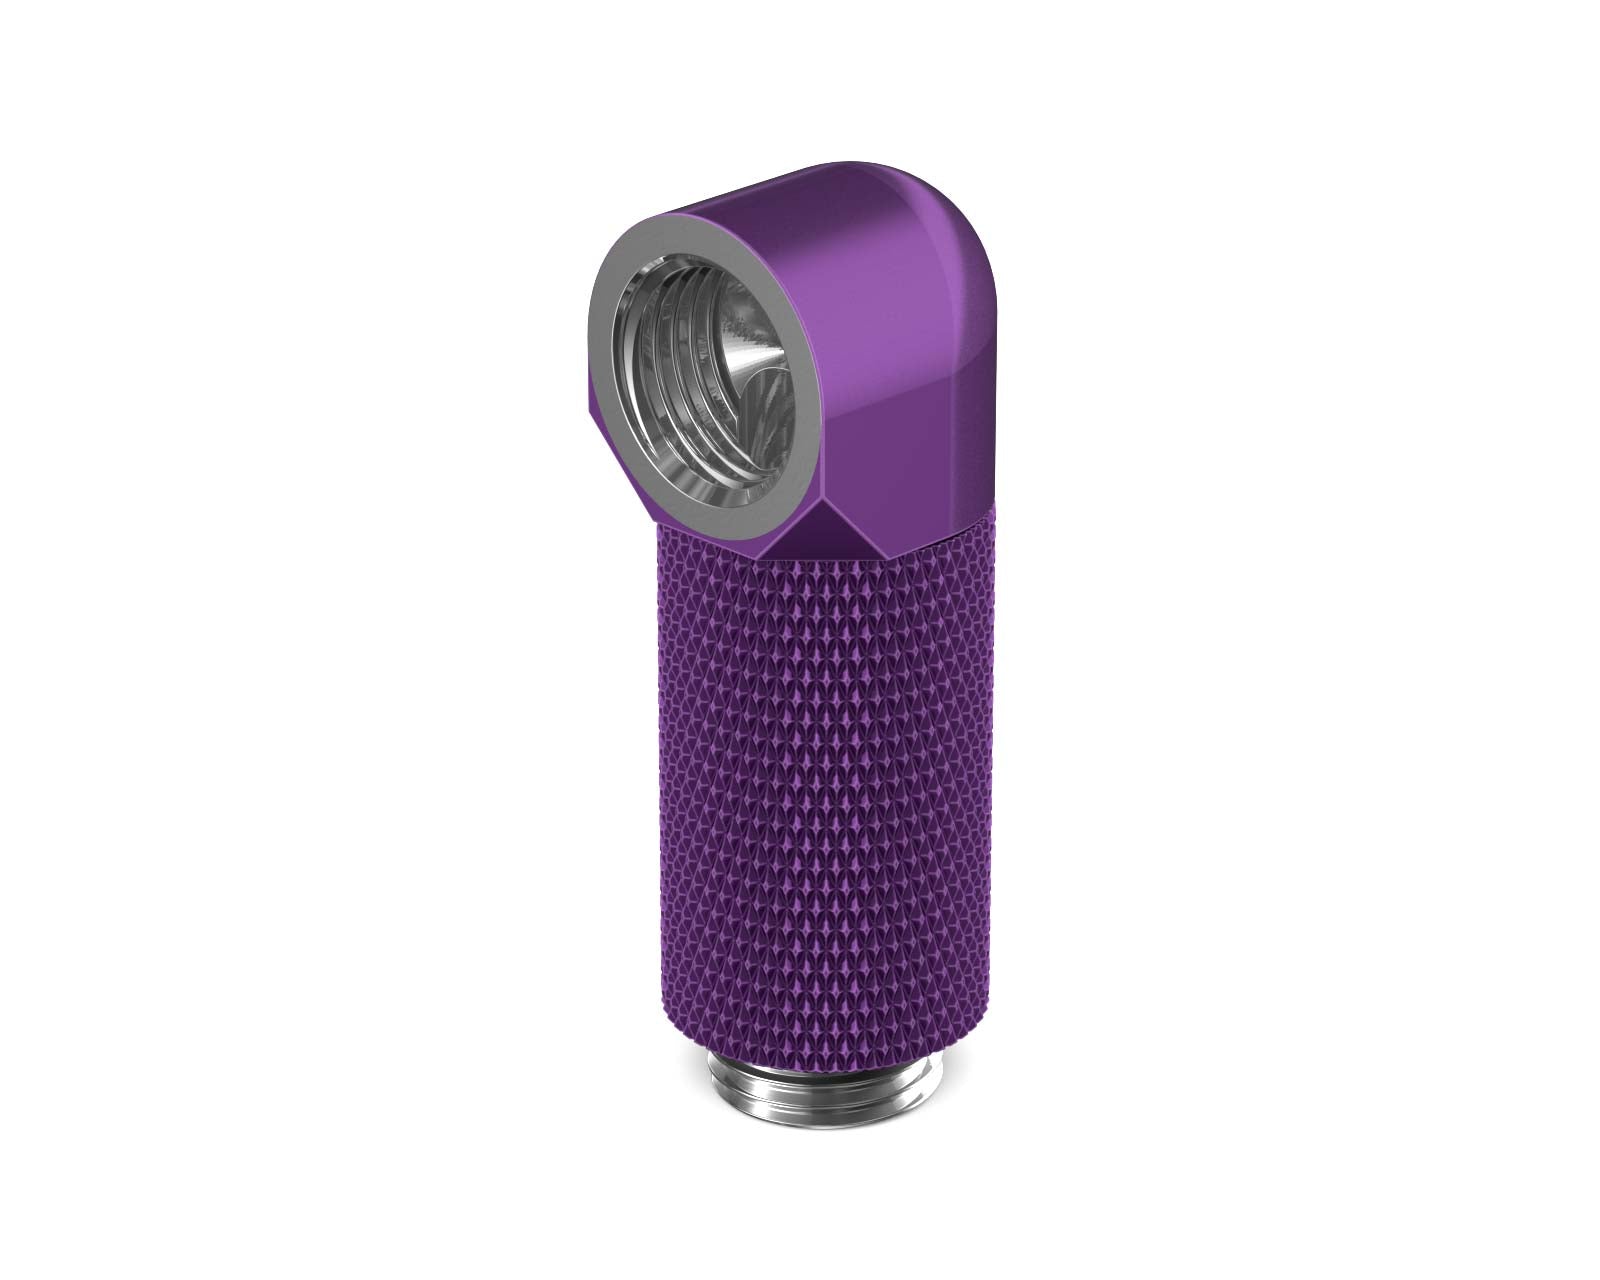 BSTOCK:PrimoChill Male to Female G 1/4in. 90 Degree SX Rotary 30mm Extension Elbow Fitting - Candy Purple - PrimoChill - KEEPING IT COOL